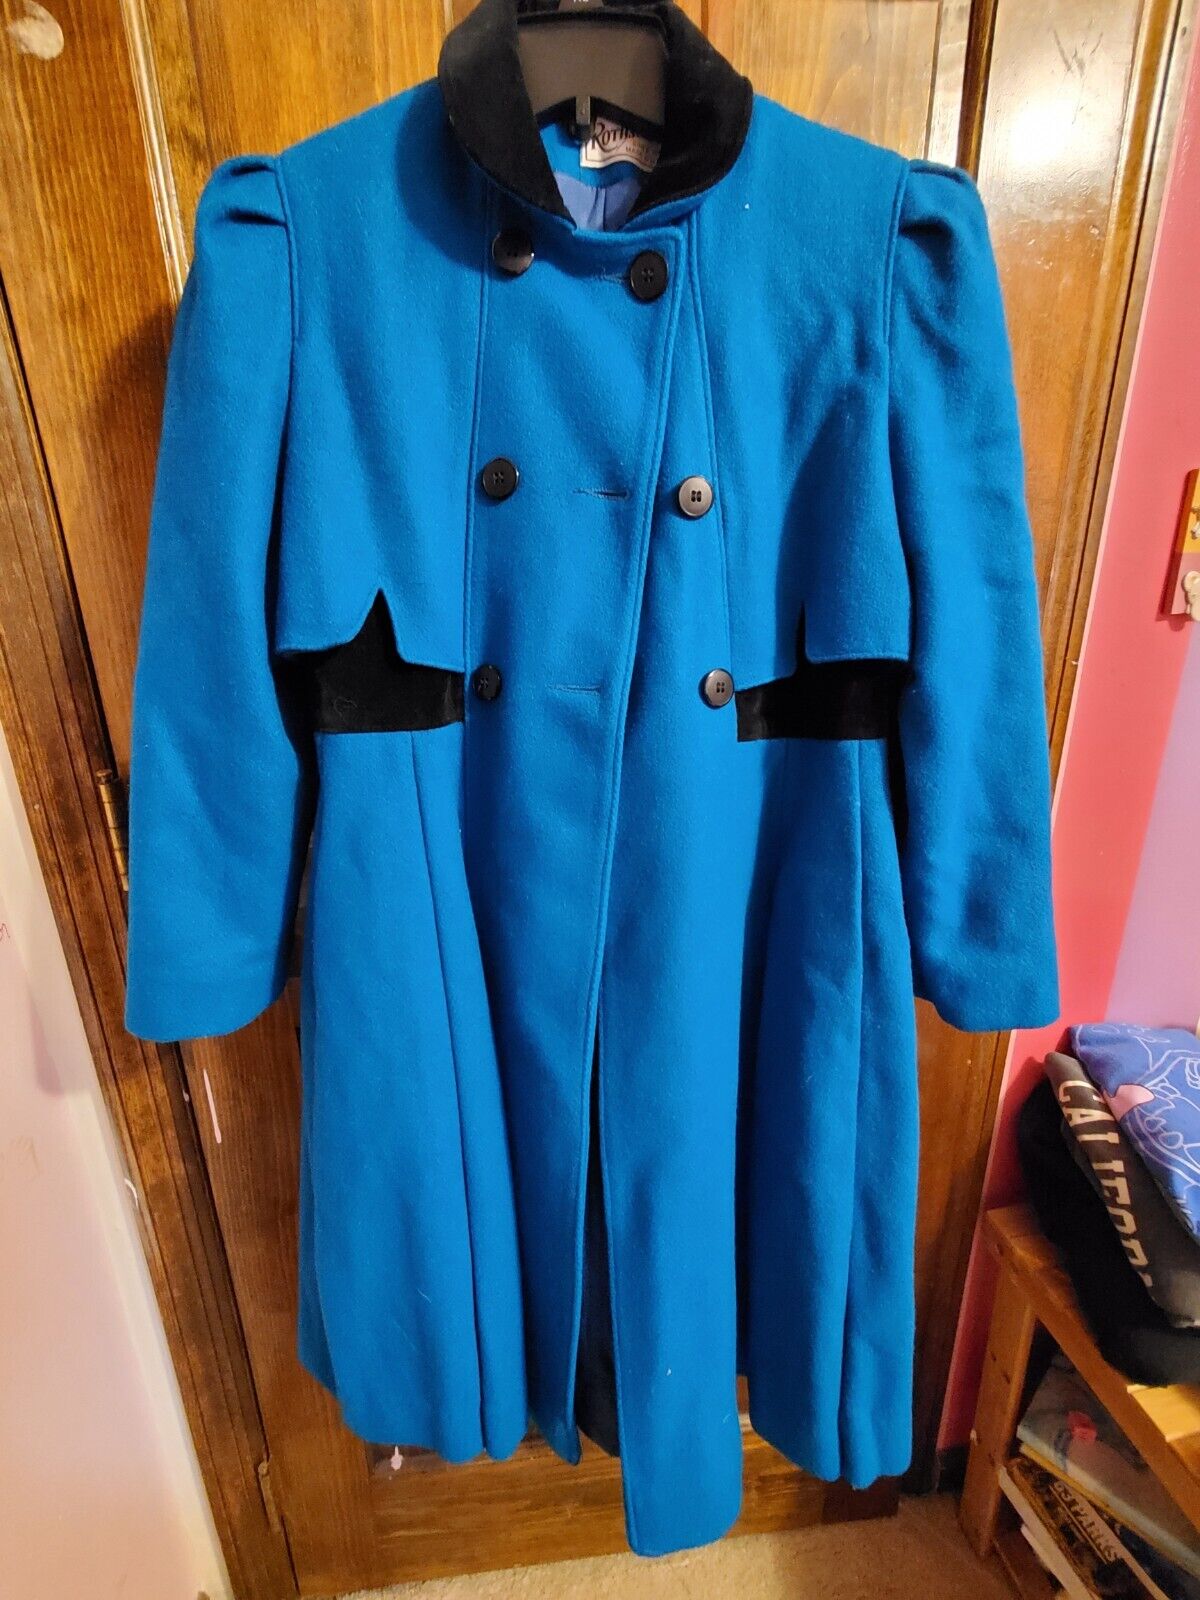 Gorgeous VINTAGE 90s ROTHSCHILD girl\'s Wool Pea Coat Size 12 BLUE Bow Excellent